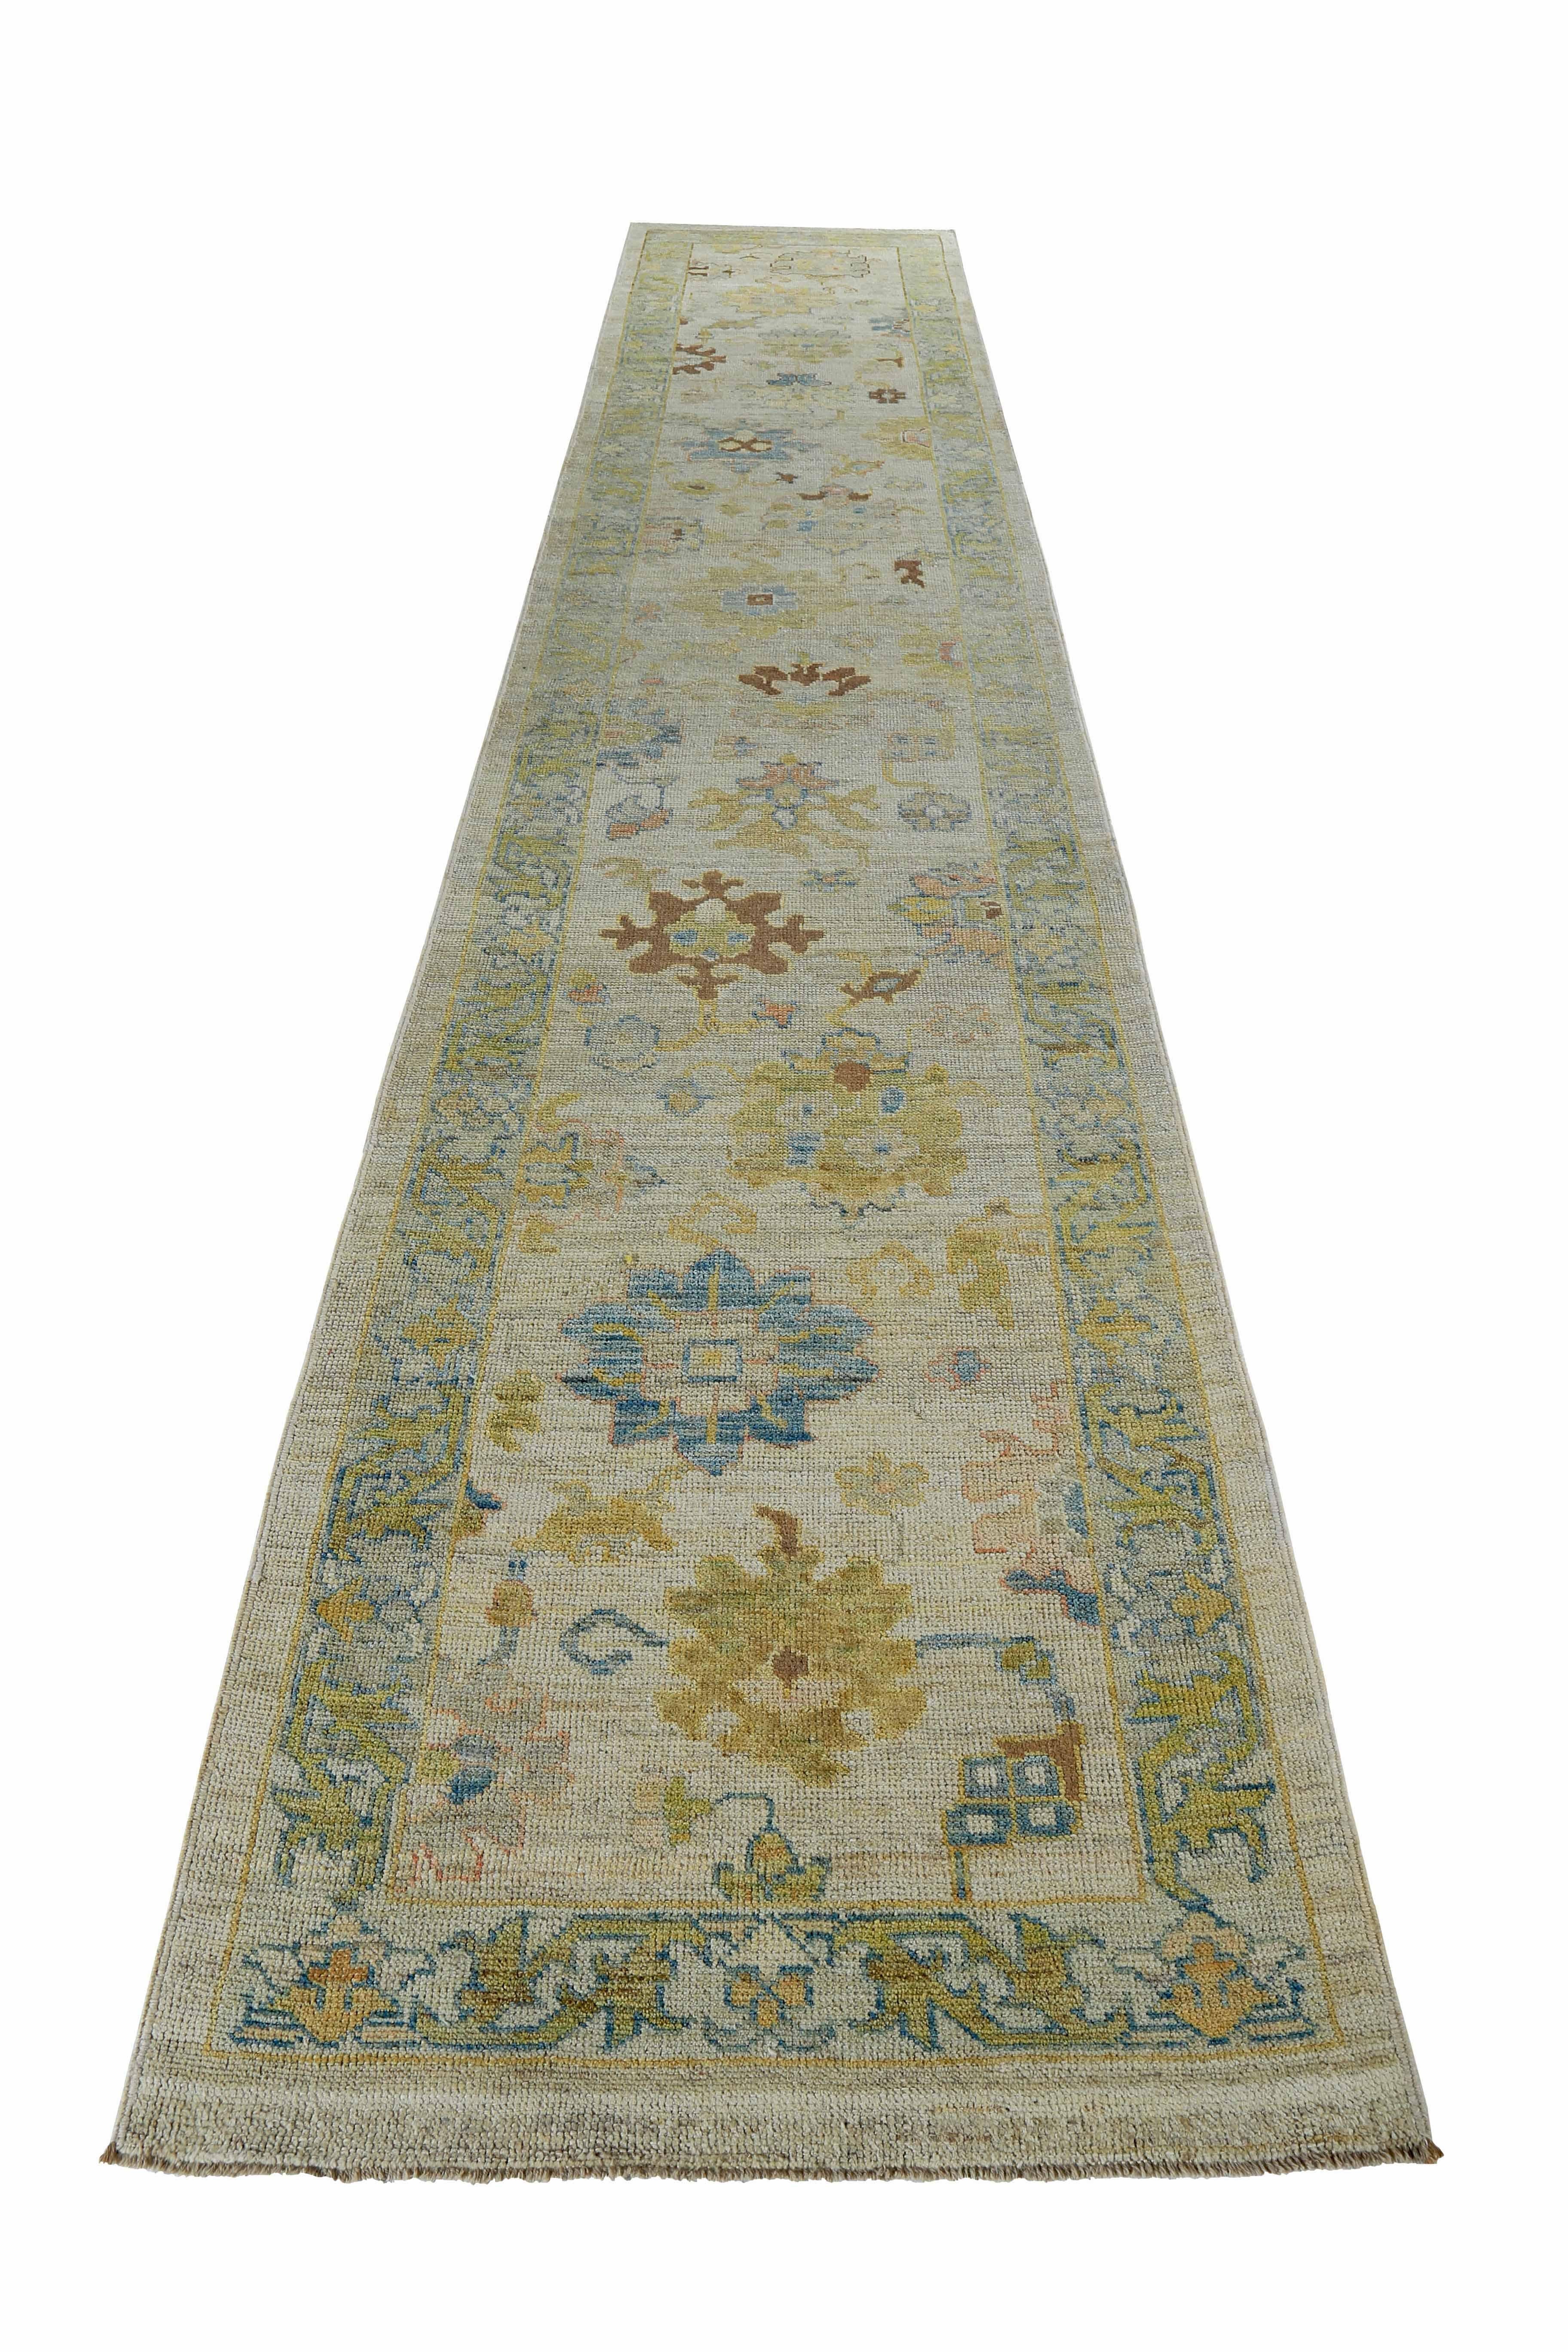 New Turkish runner rug made of handwoven sheep’s wool of the finest quality. It’s colored with organic vegetable dyes that are certified safe for humans and pets alike. It features blue and green floral details on an ivory field. Flower patterns are